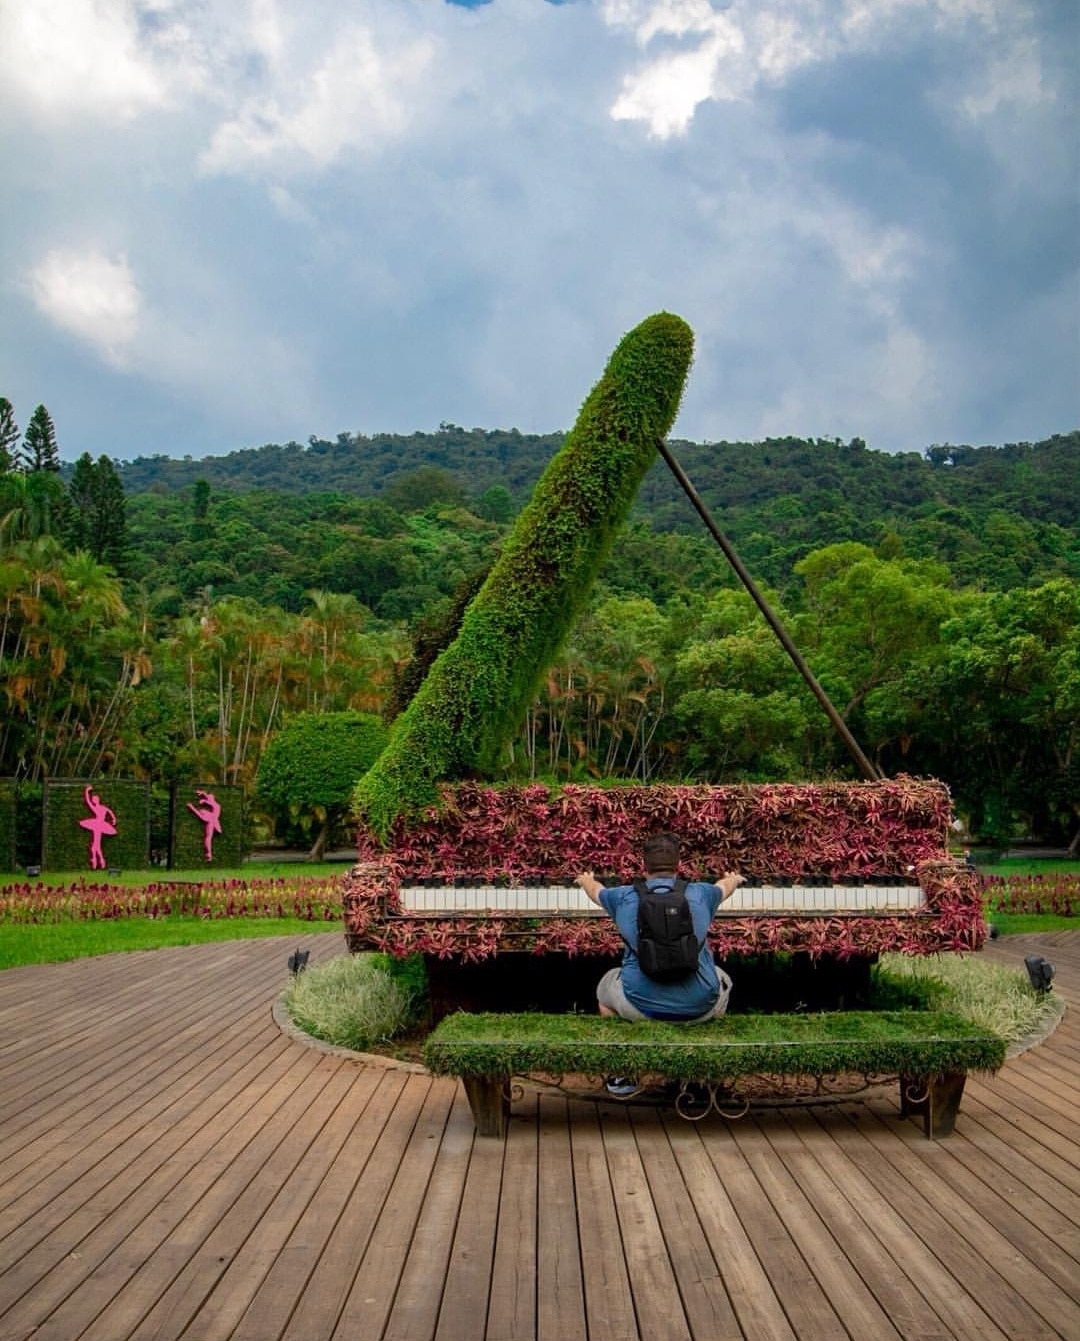 If you're visiting the National Palace Museum in Taipei be sure to make the short trip over to the Chiang Kai-Shek Shilin Residence. It's the palace and grounds of the former leader of Taiwan that is now open to the public. You'll lose yourself in the beautiful gardens and be amazed at the floral creations like this larger-than-life piano. 

Entrance to the grounds and gardens is free but there is a small charge to visit the presidential residence itself.

#taiwan #taipei #shilinresidence #wanderlust #gardens